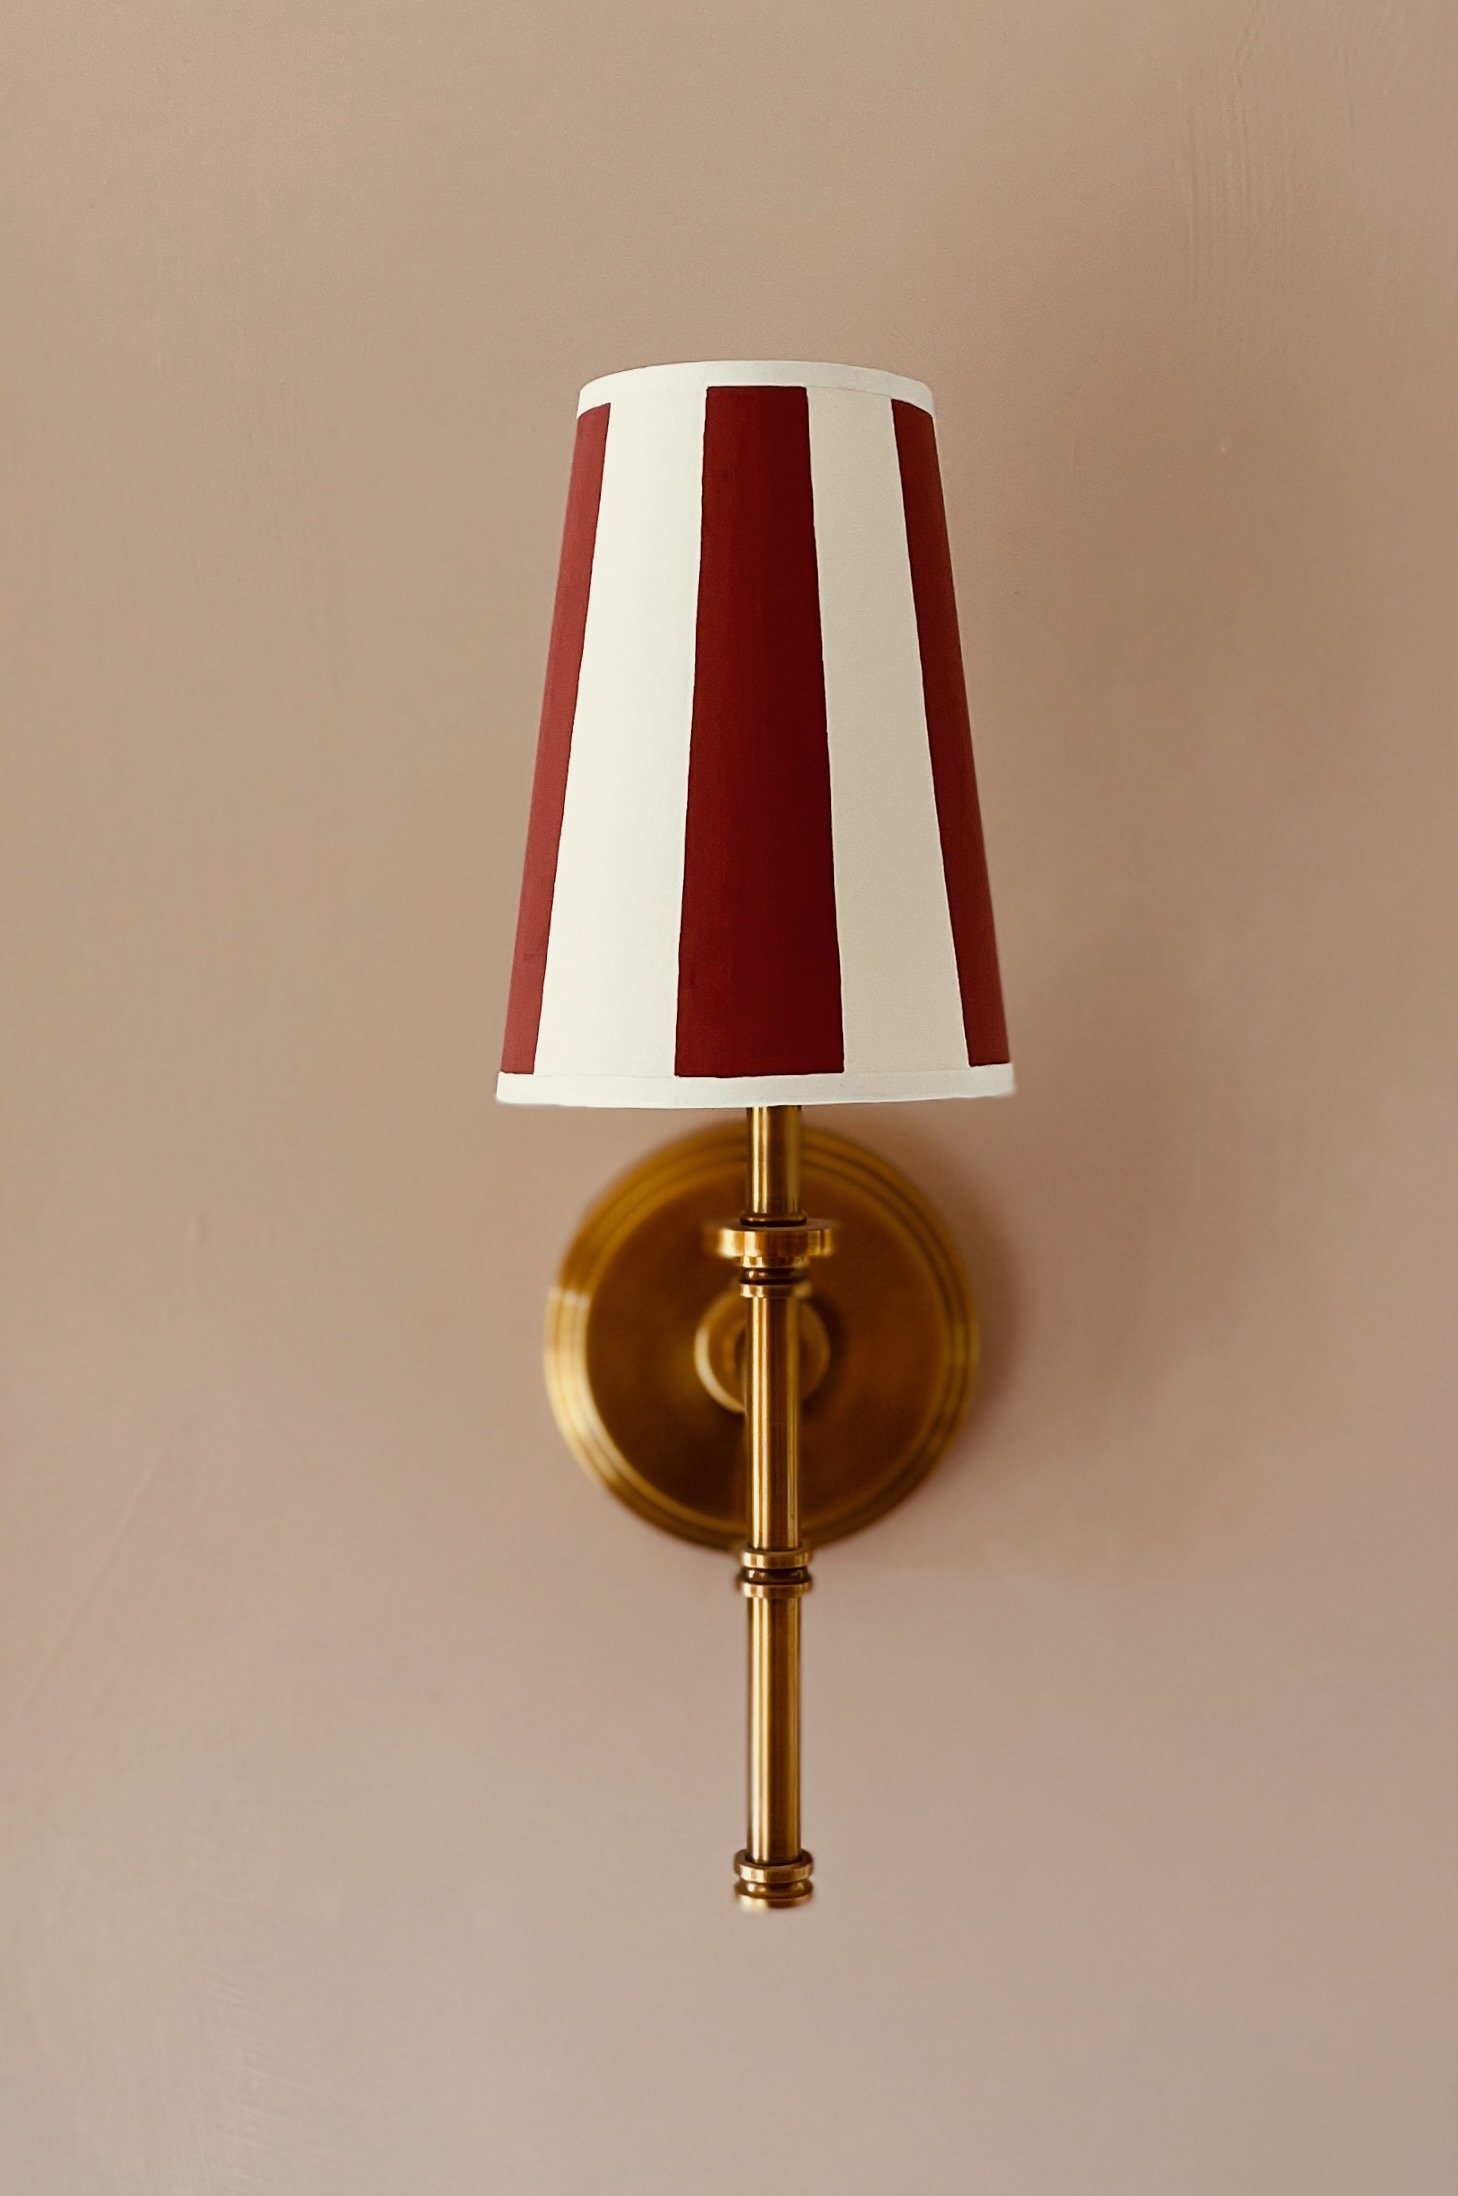 A small shade for a wall light with dark red stripes 